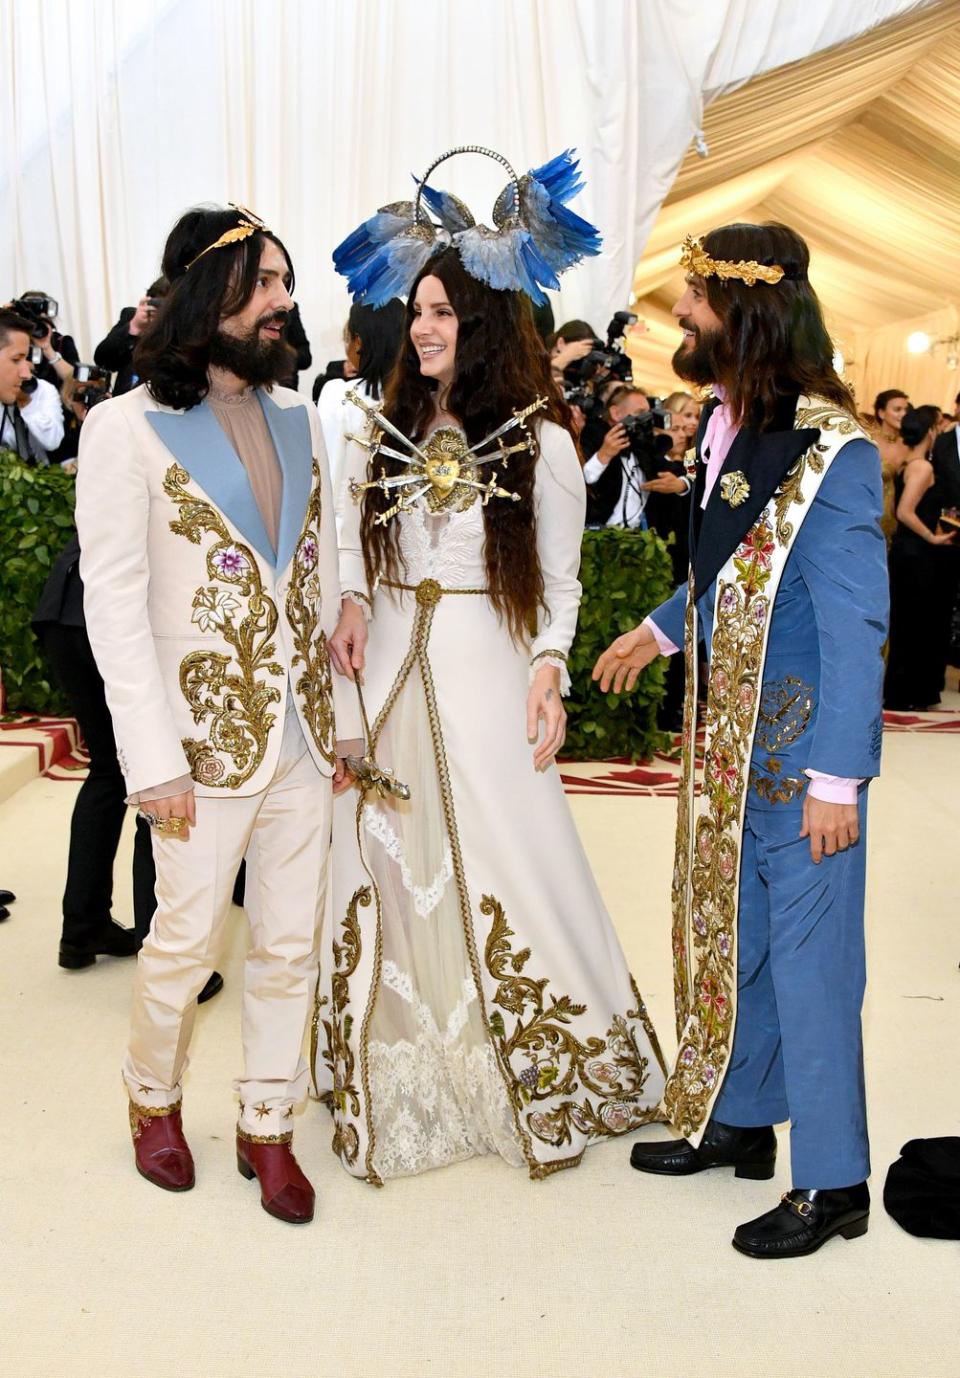 new york, ny may 07 alessandro michele, lana del ray and jared leto attend the heavenly bodies fashion the catholic imagination costume institute gala at the metropolitan museum of art on may 7, 2018 in new york city photo by dia dipasupilwireimage